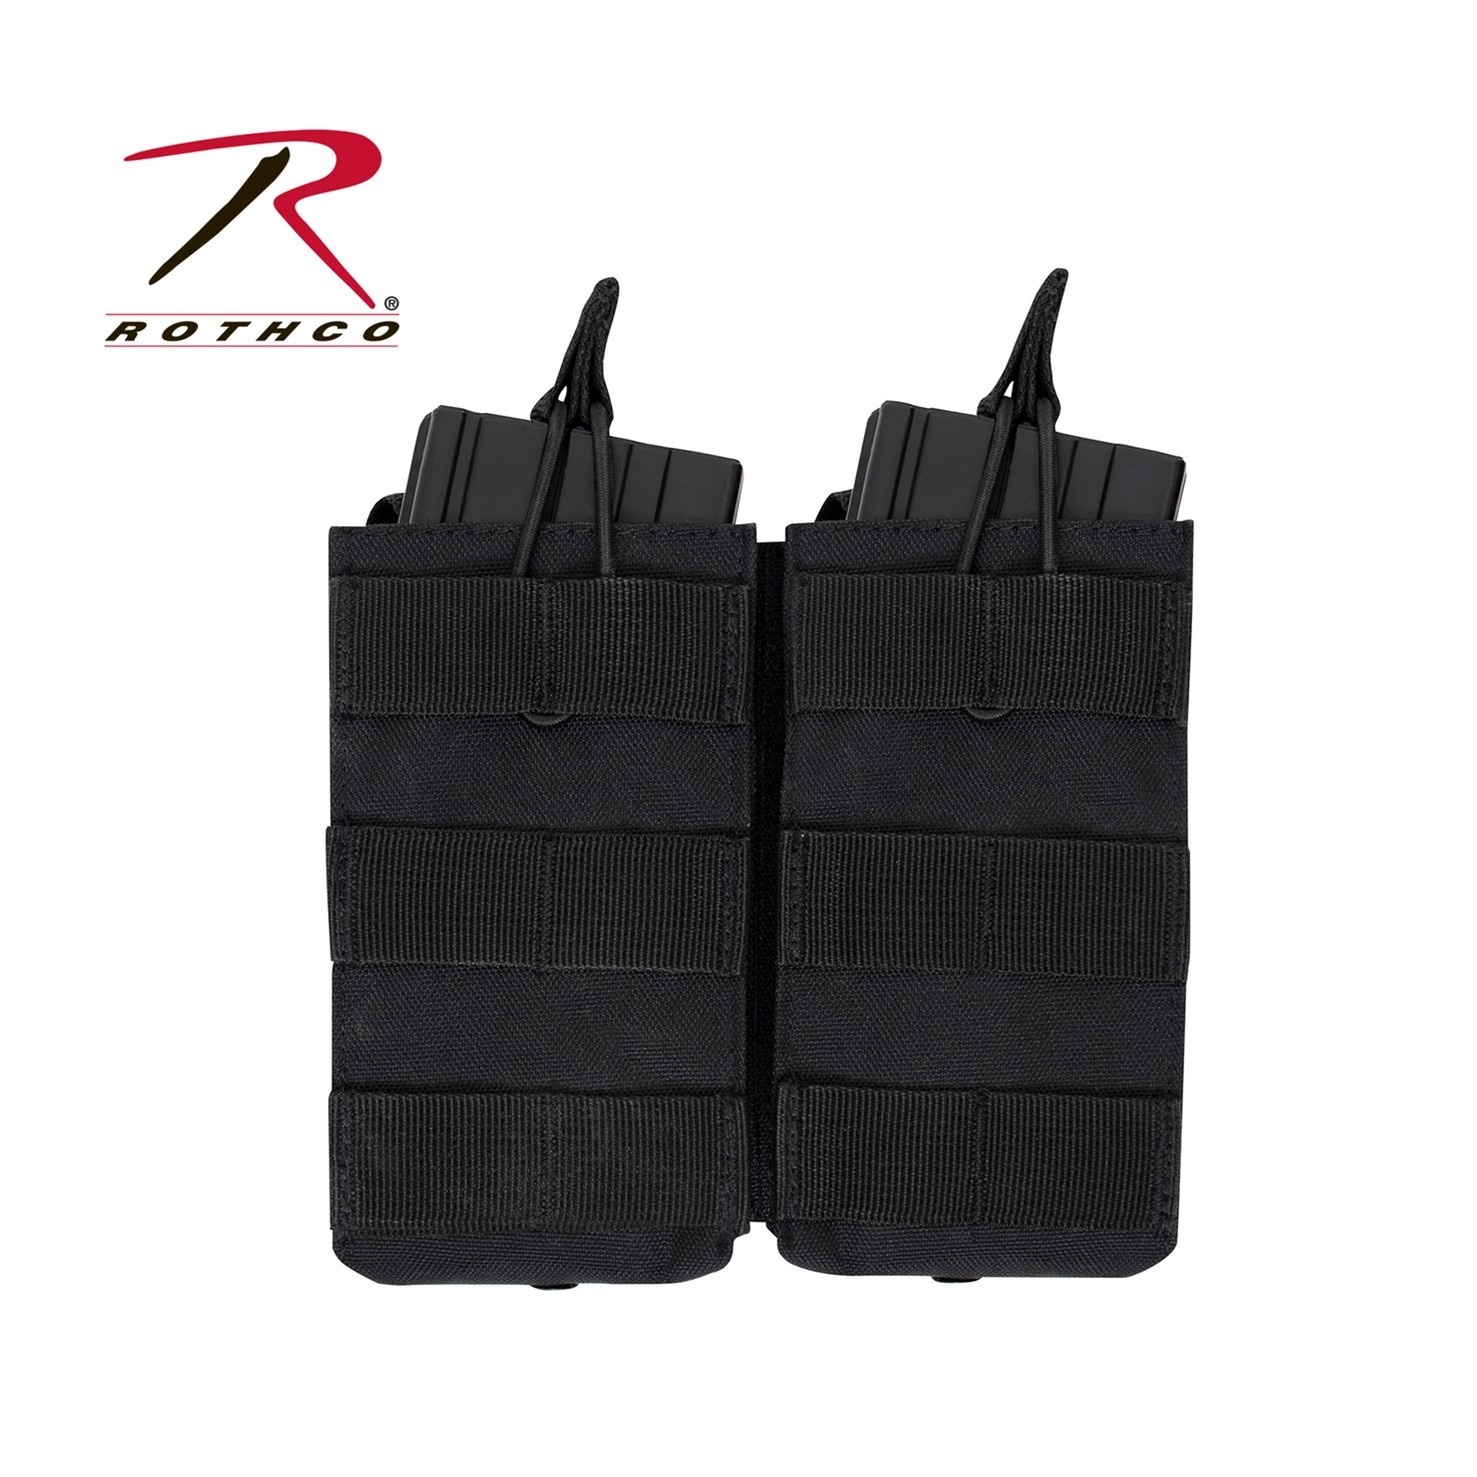 Rothco Molle Open Top Double Mag Pouch